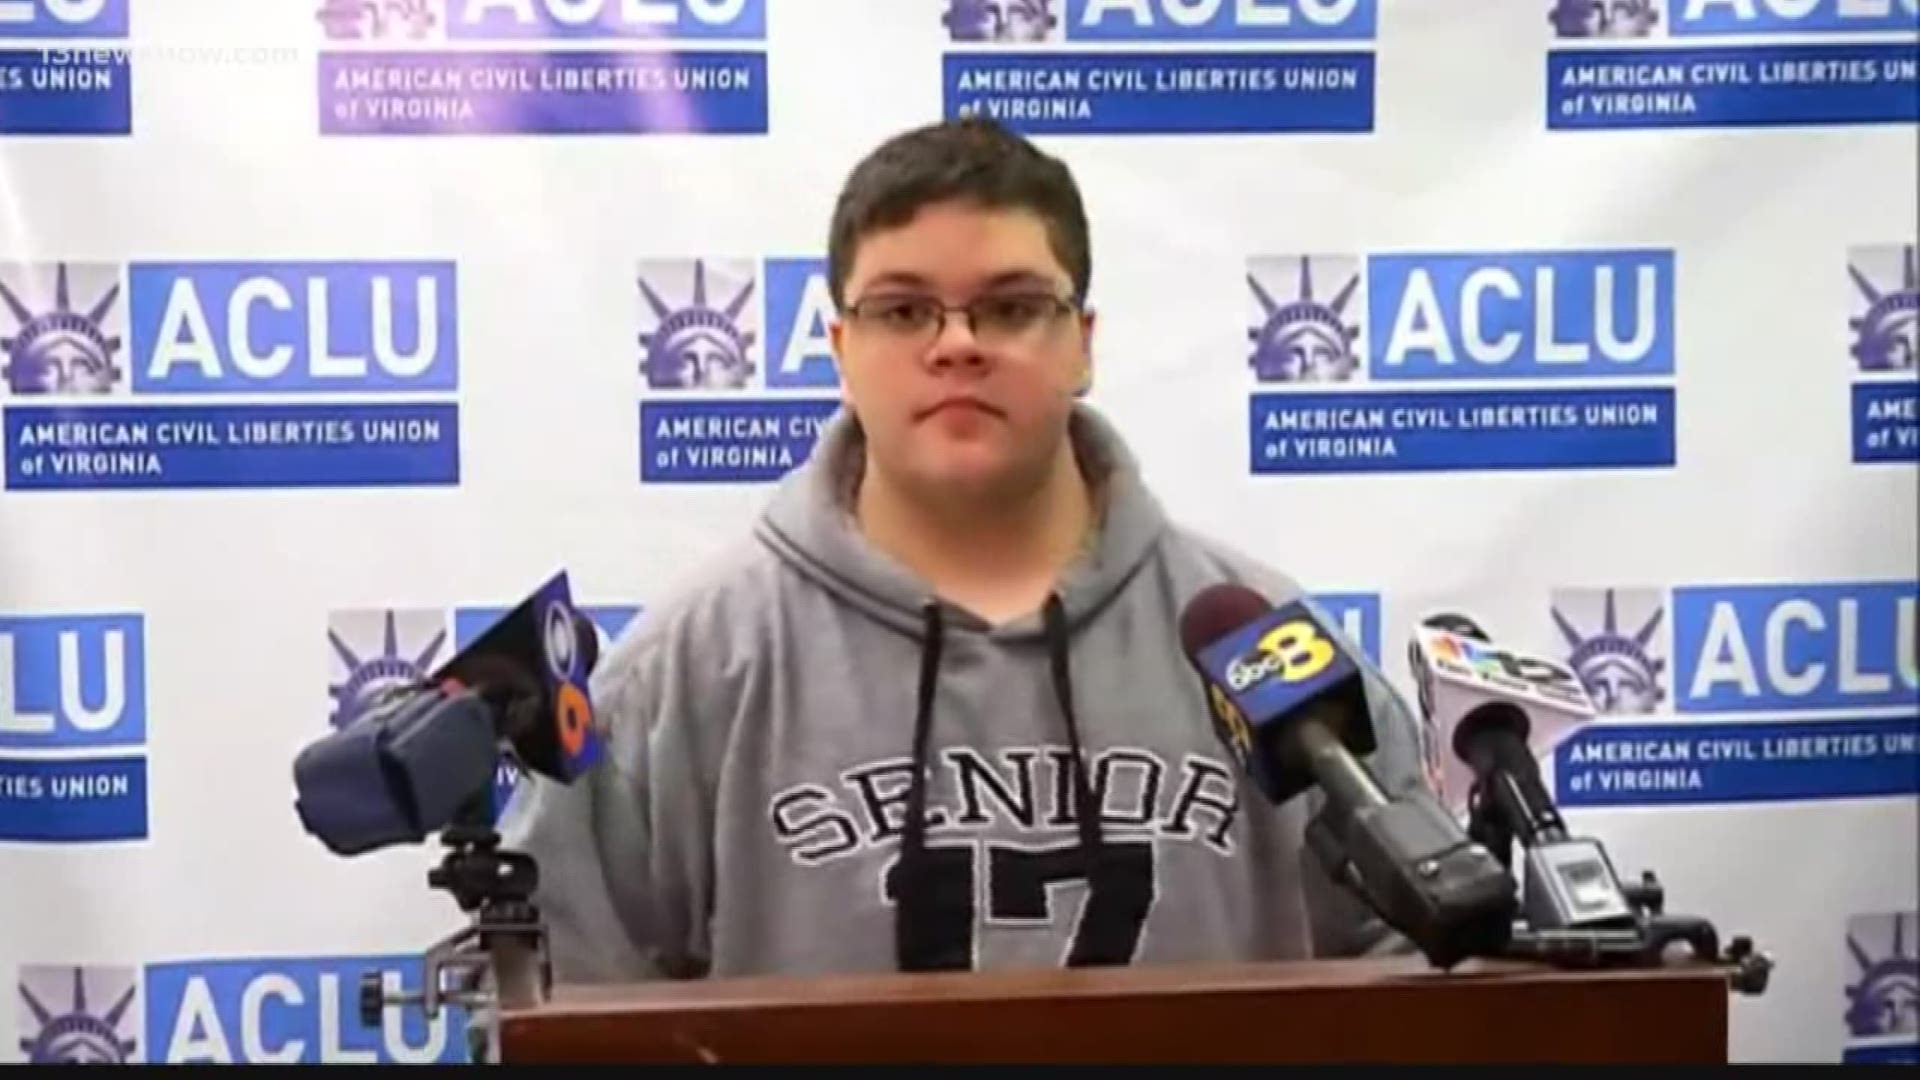 A federal judge in the Eastern District of Virginia just sided with Gavin Grimm.